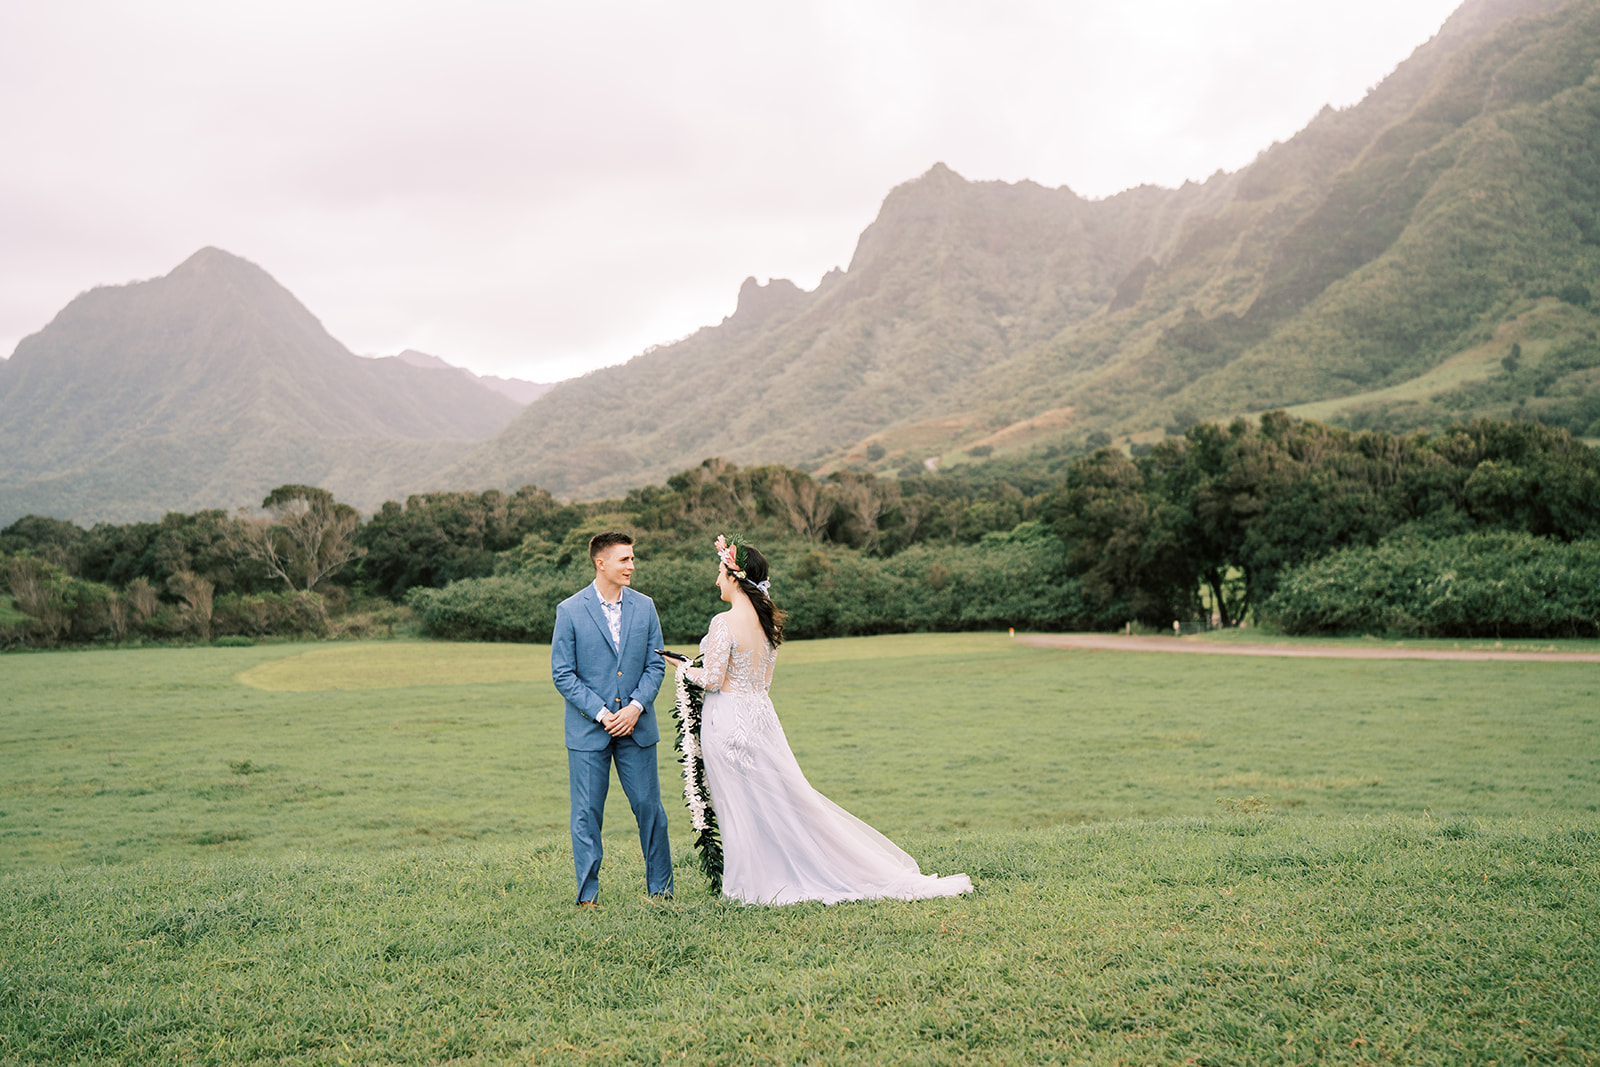 A bride and groom standing in a field at Kualoa Ranch with mountains in the background.